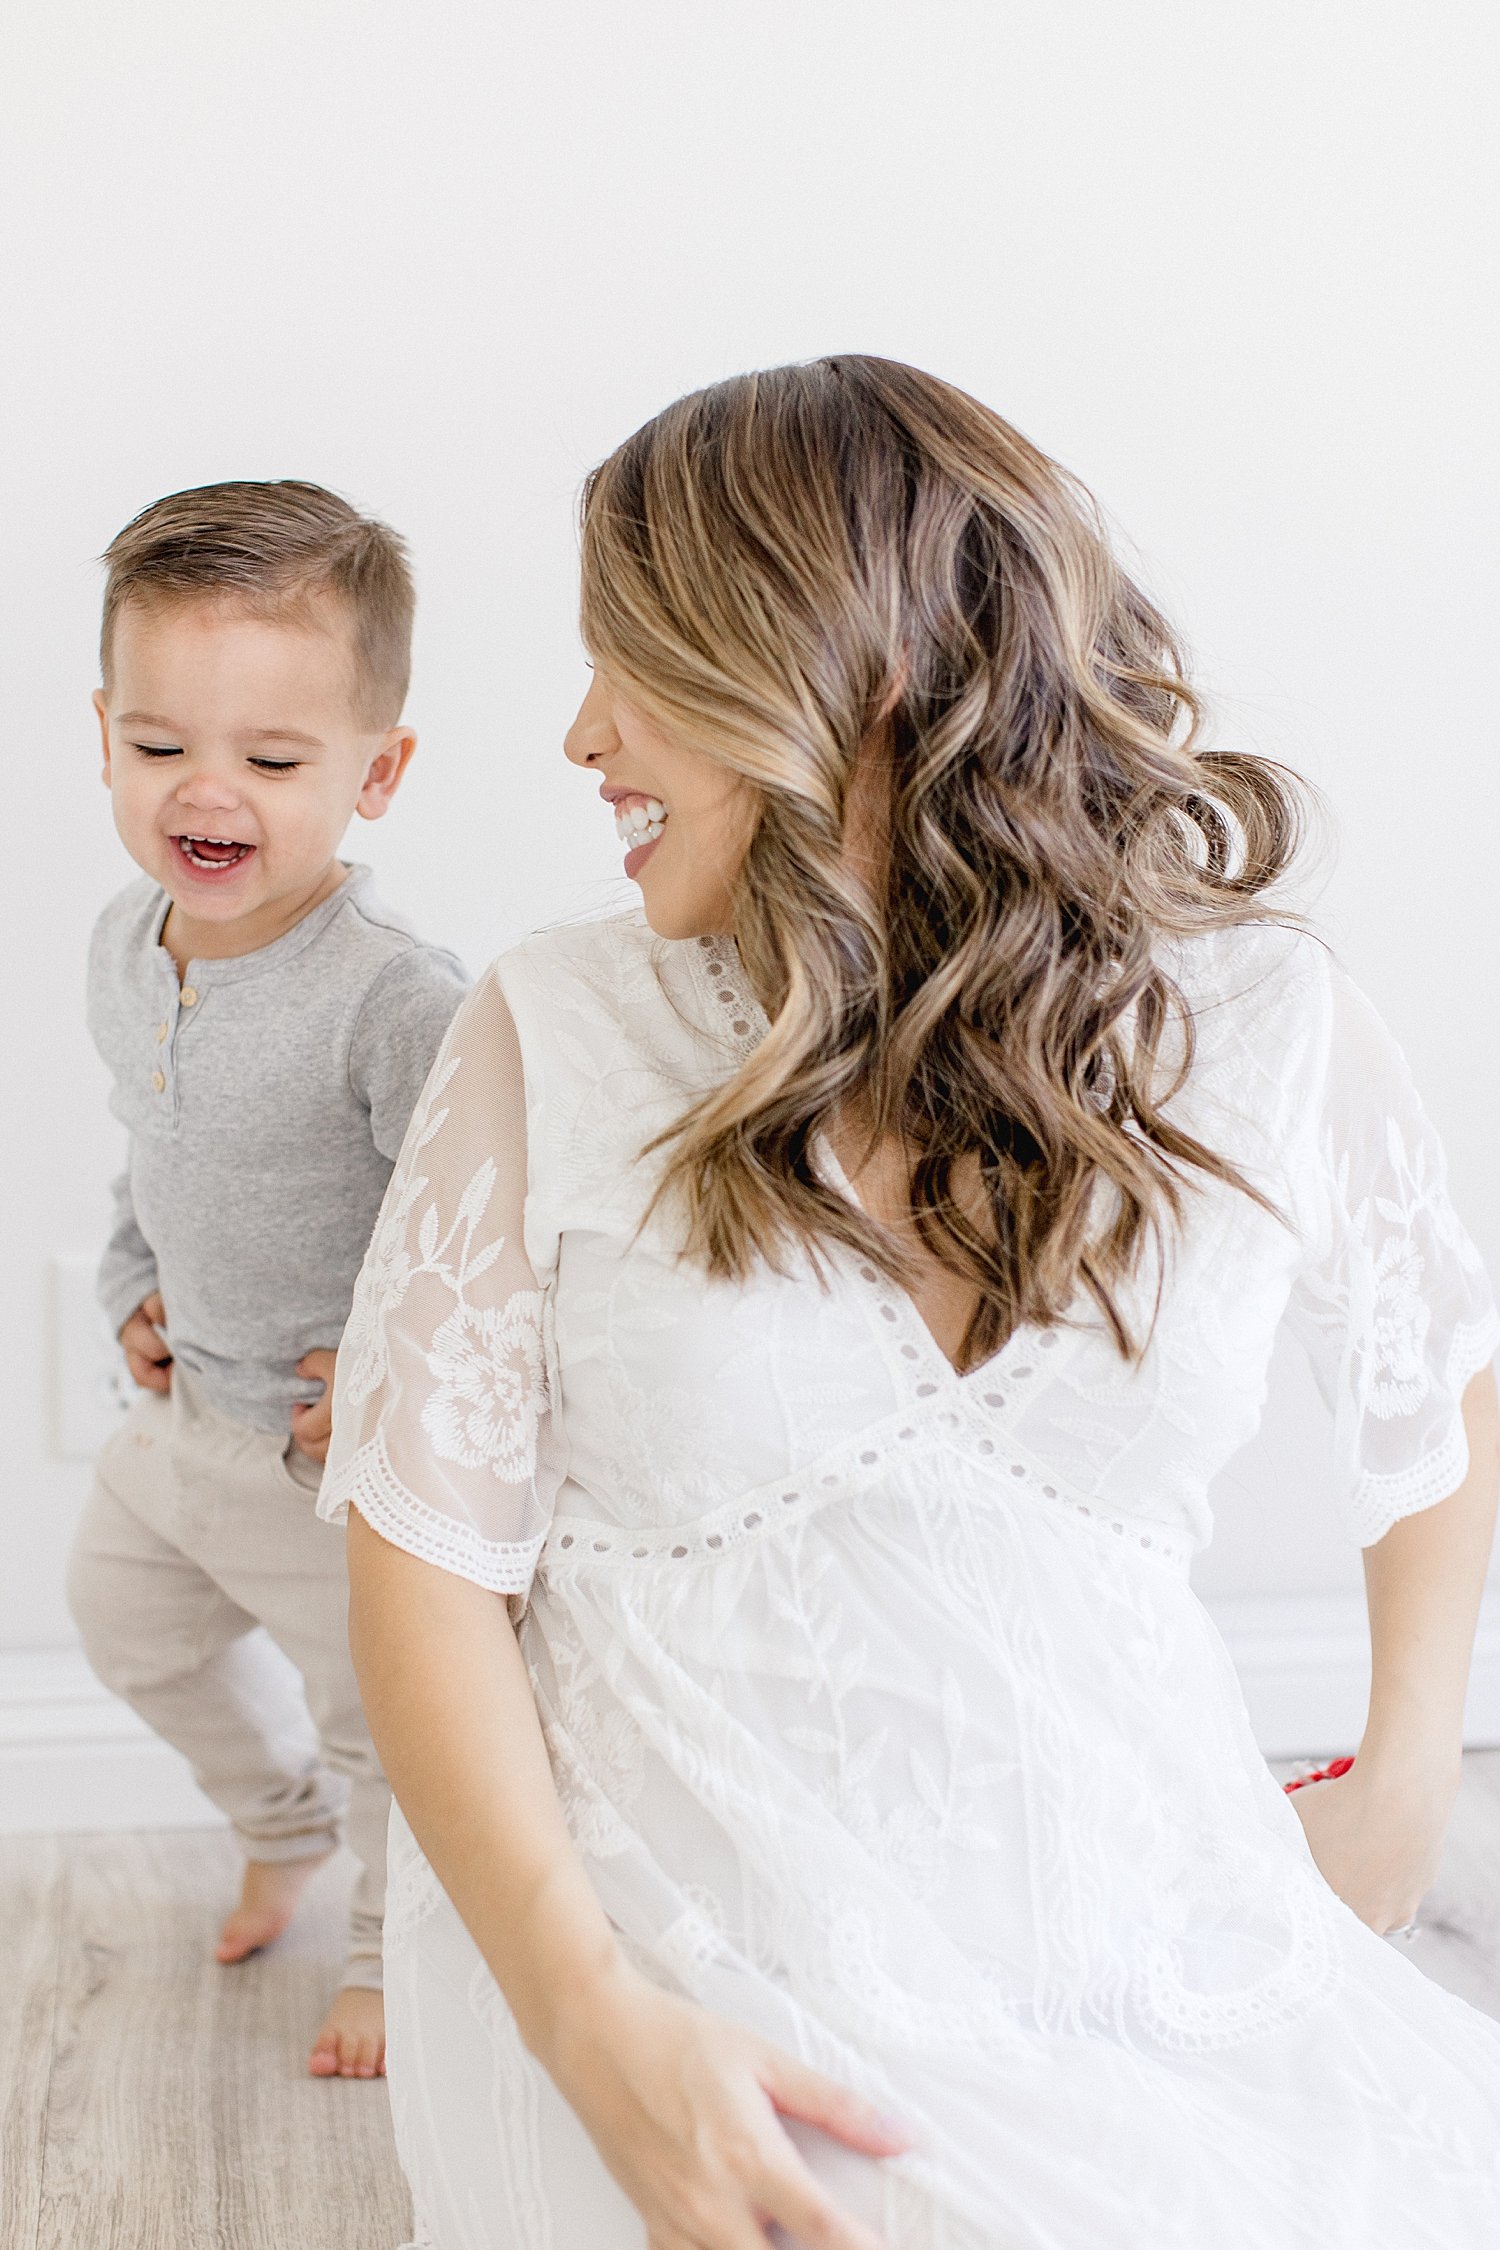 Toddler running around Mom | Ambre Williams Photography